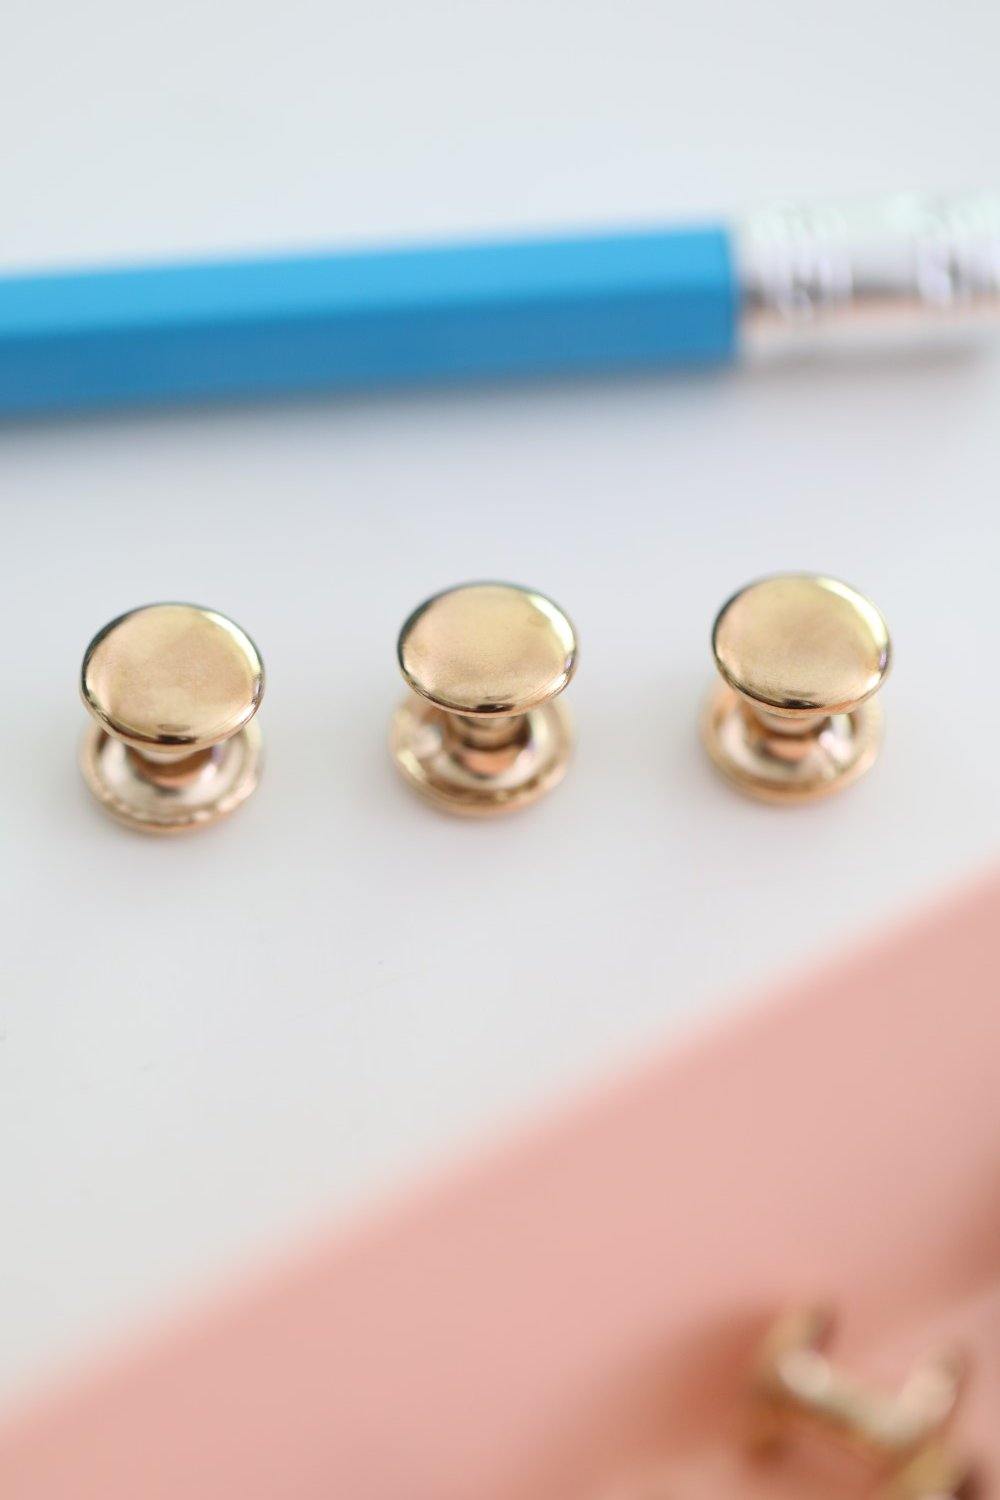 Googly Gooeys Double Cap Rivet | DIY Souvenir Accessories (40pcs)-Accessories-GooglyGooeys | Cricut | Arts Craft and DIY Store based in the Philippines